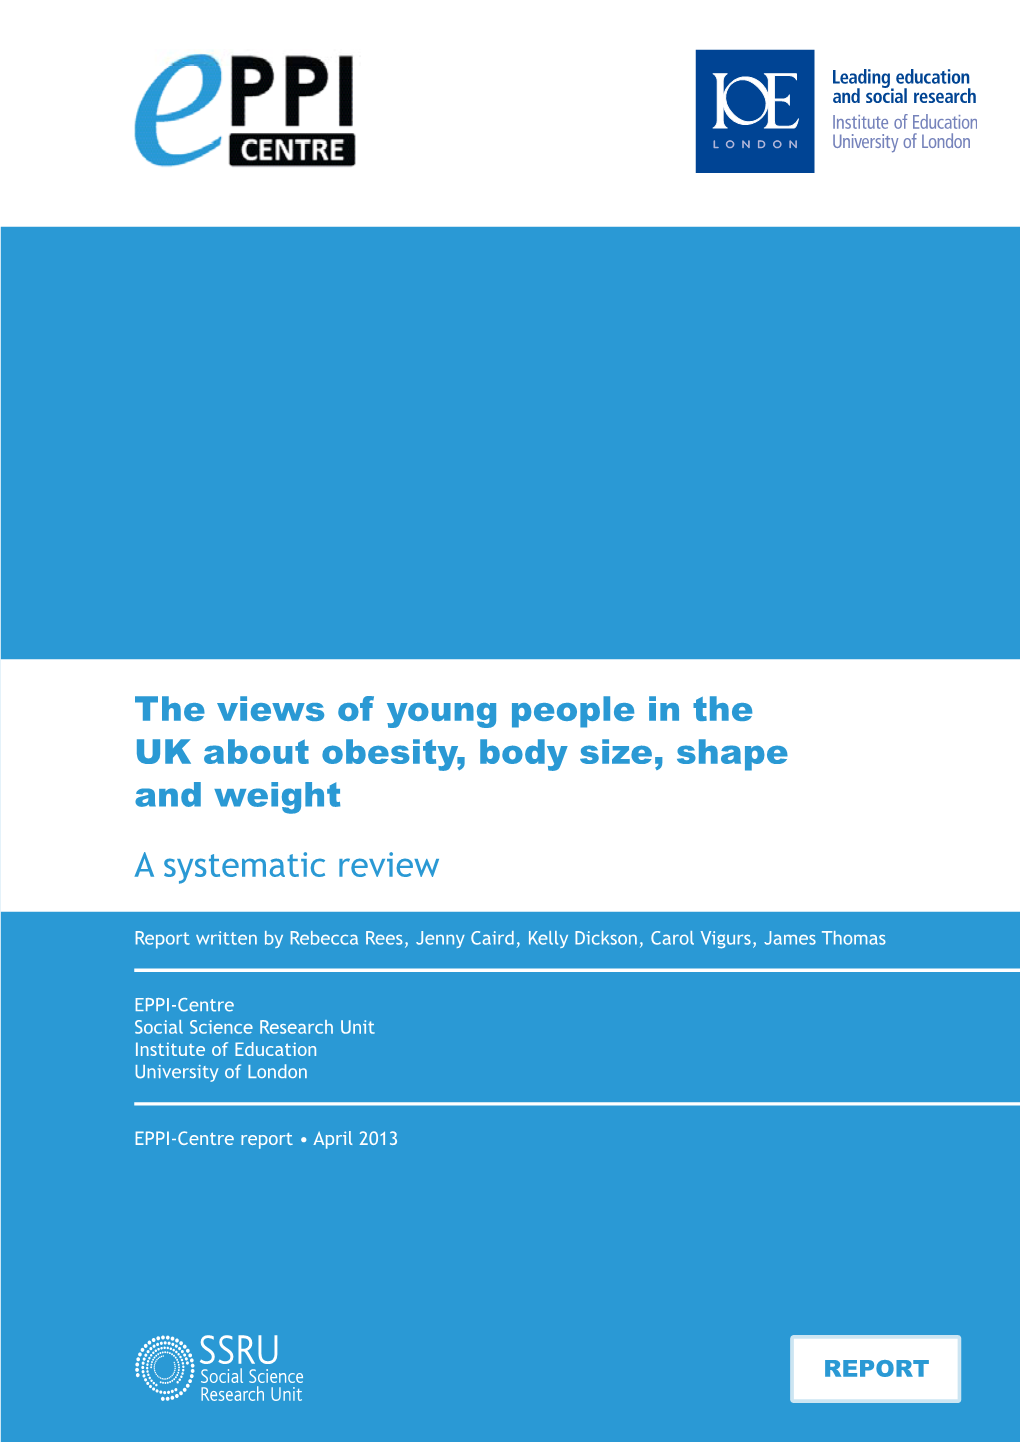 The Views of Young People in the UK About Obesity, Body Size, Shape and Weight